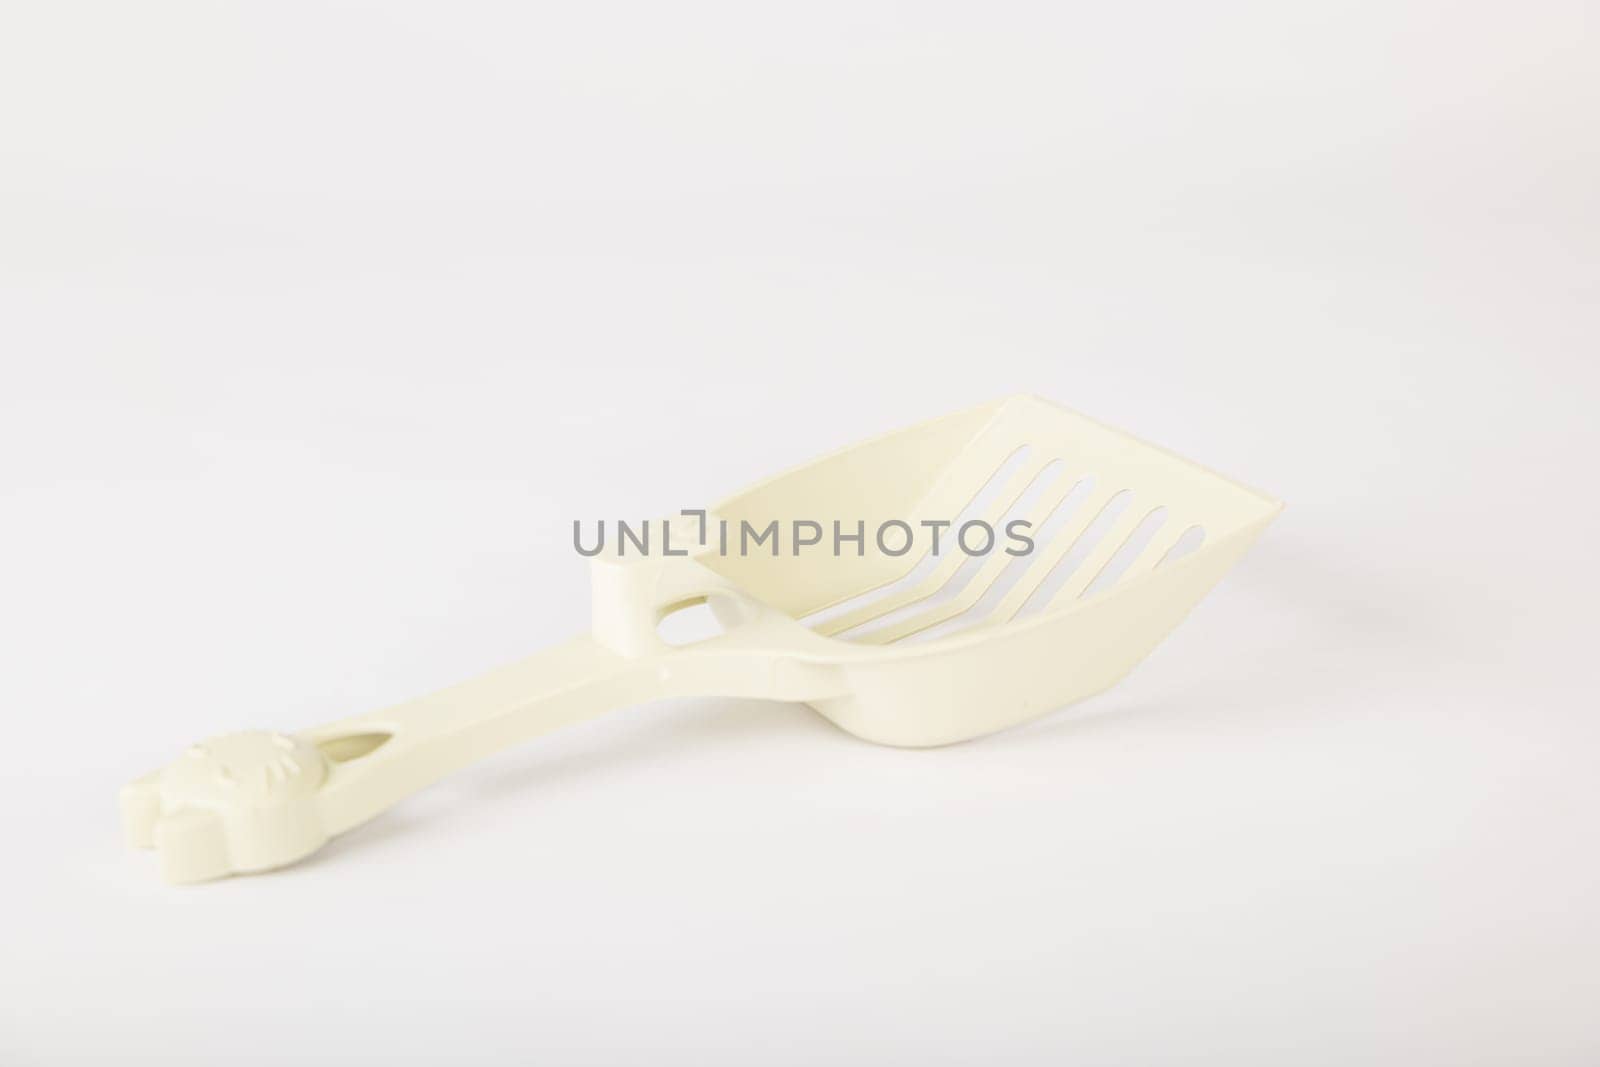 Isolated on a white background metal cat litter scoops are a must for maintaining hygiene and cleanliness in your cat's litter box. Purity and care in one simple tool. by Sorapop